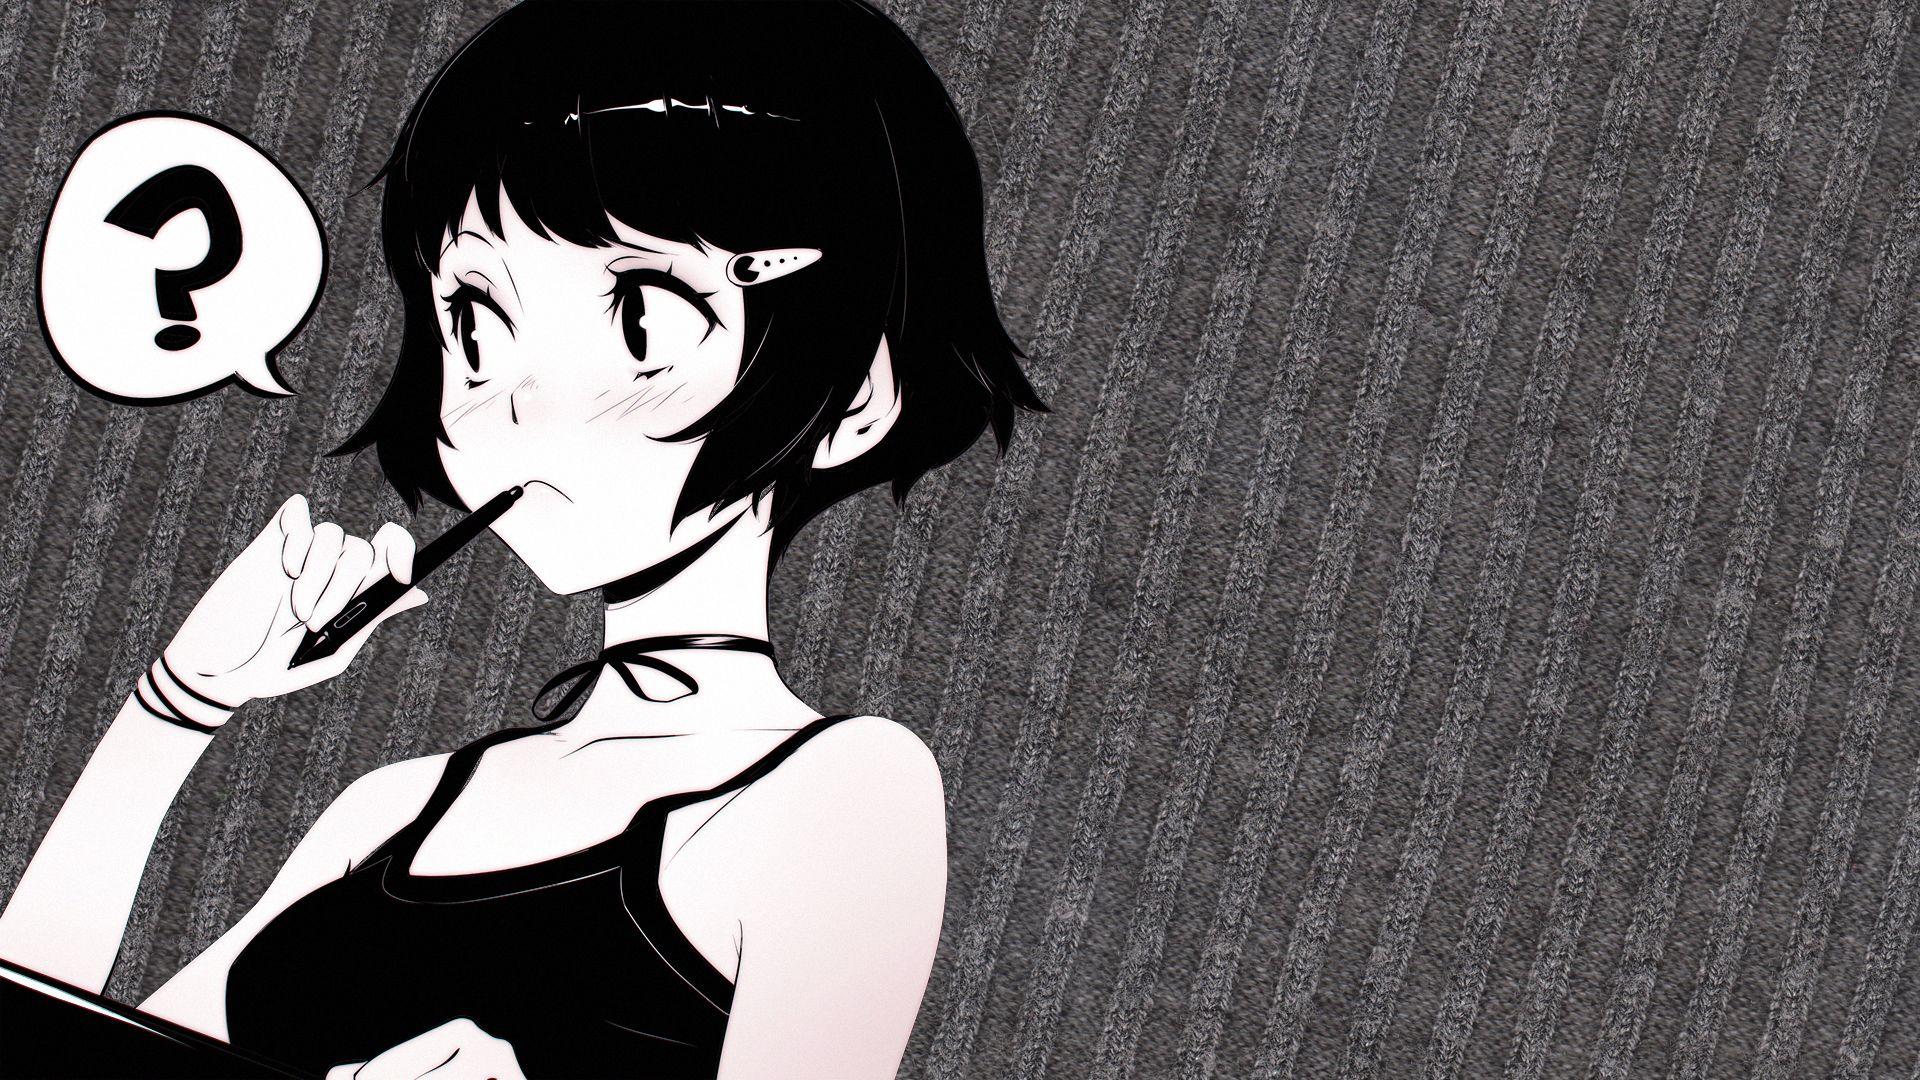 Black And White Anime 1920x1080 Wallpapers - Wallpaper Cave